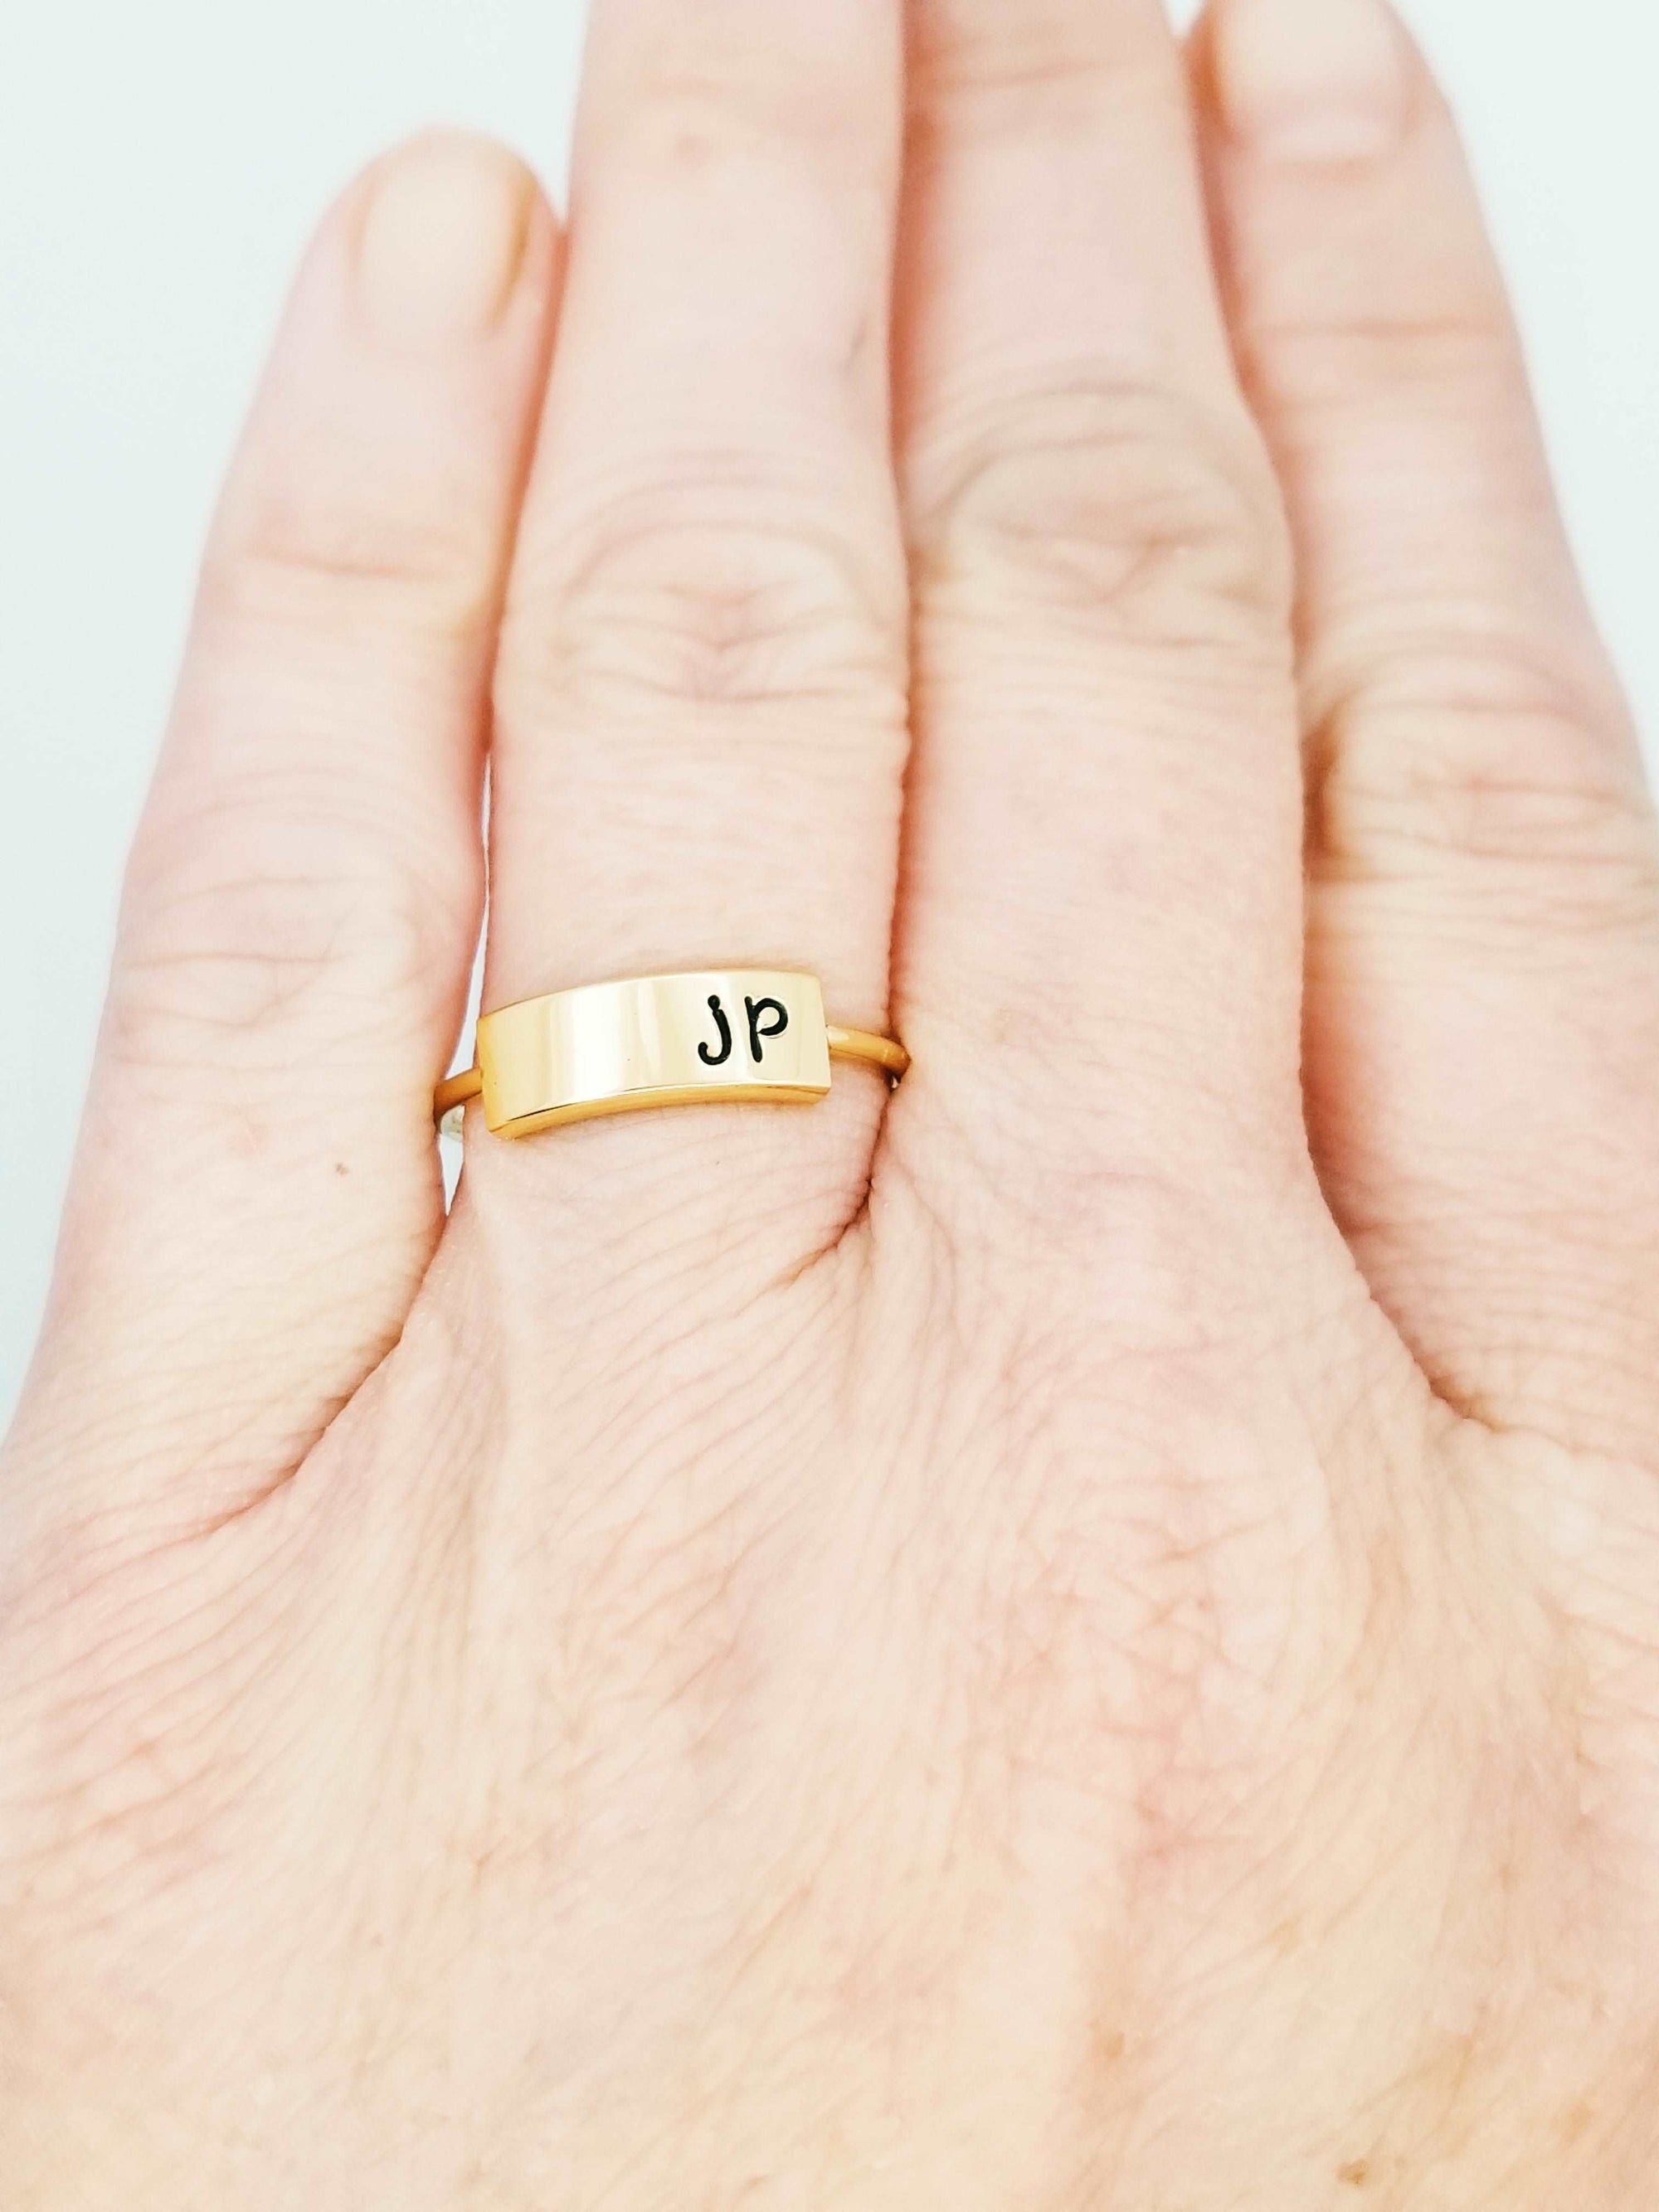 Initial Ring, Personalize Jewelry, Hand Stamped Ring, Rose Gold Personalize Ring, Dainty Ring,  Custom Ring